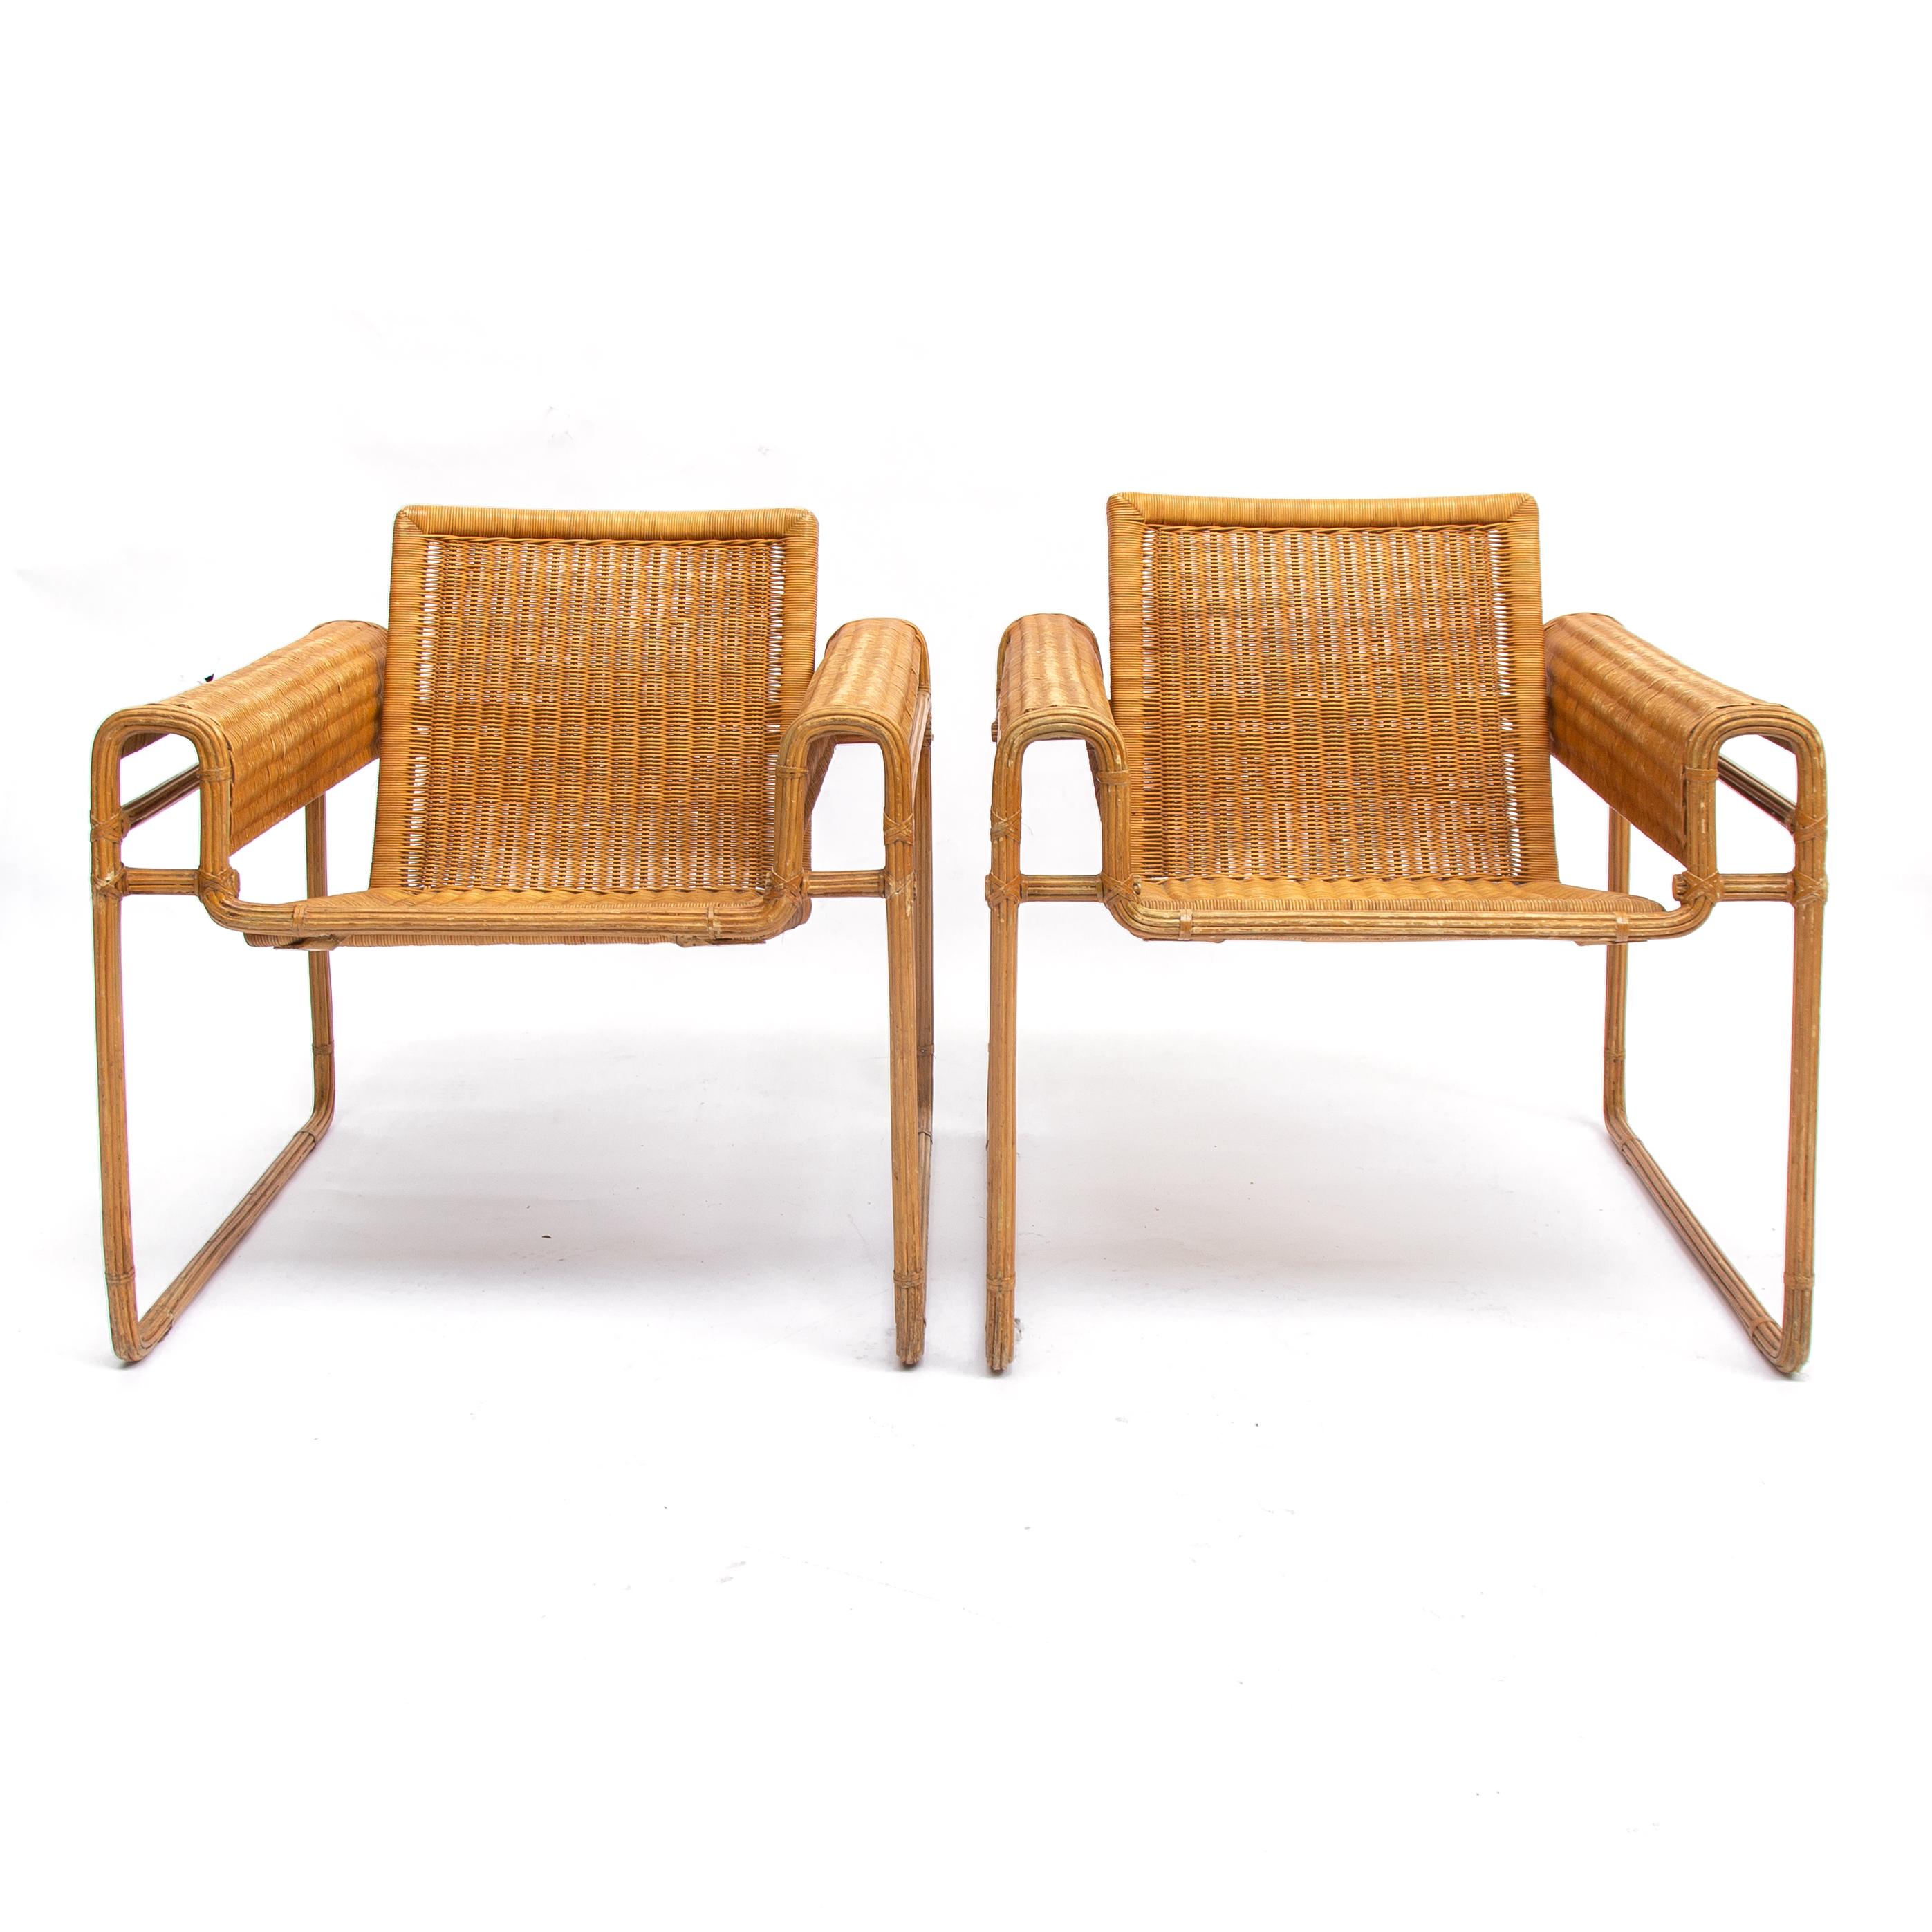 Bauhaus Wicker Chair, Inspired by Marcel Breuer's Wassily Chair, 1970s For Sale